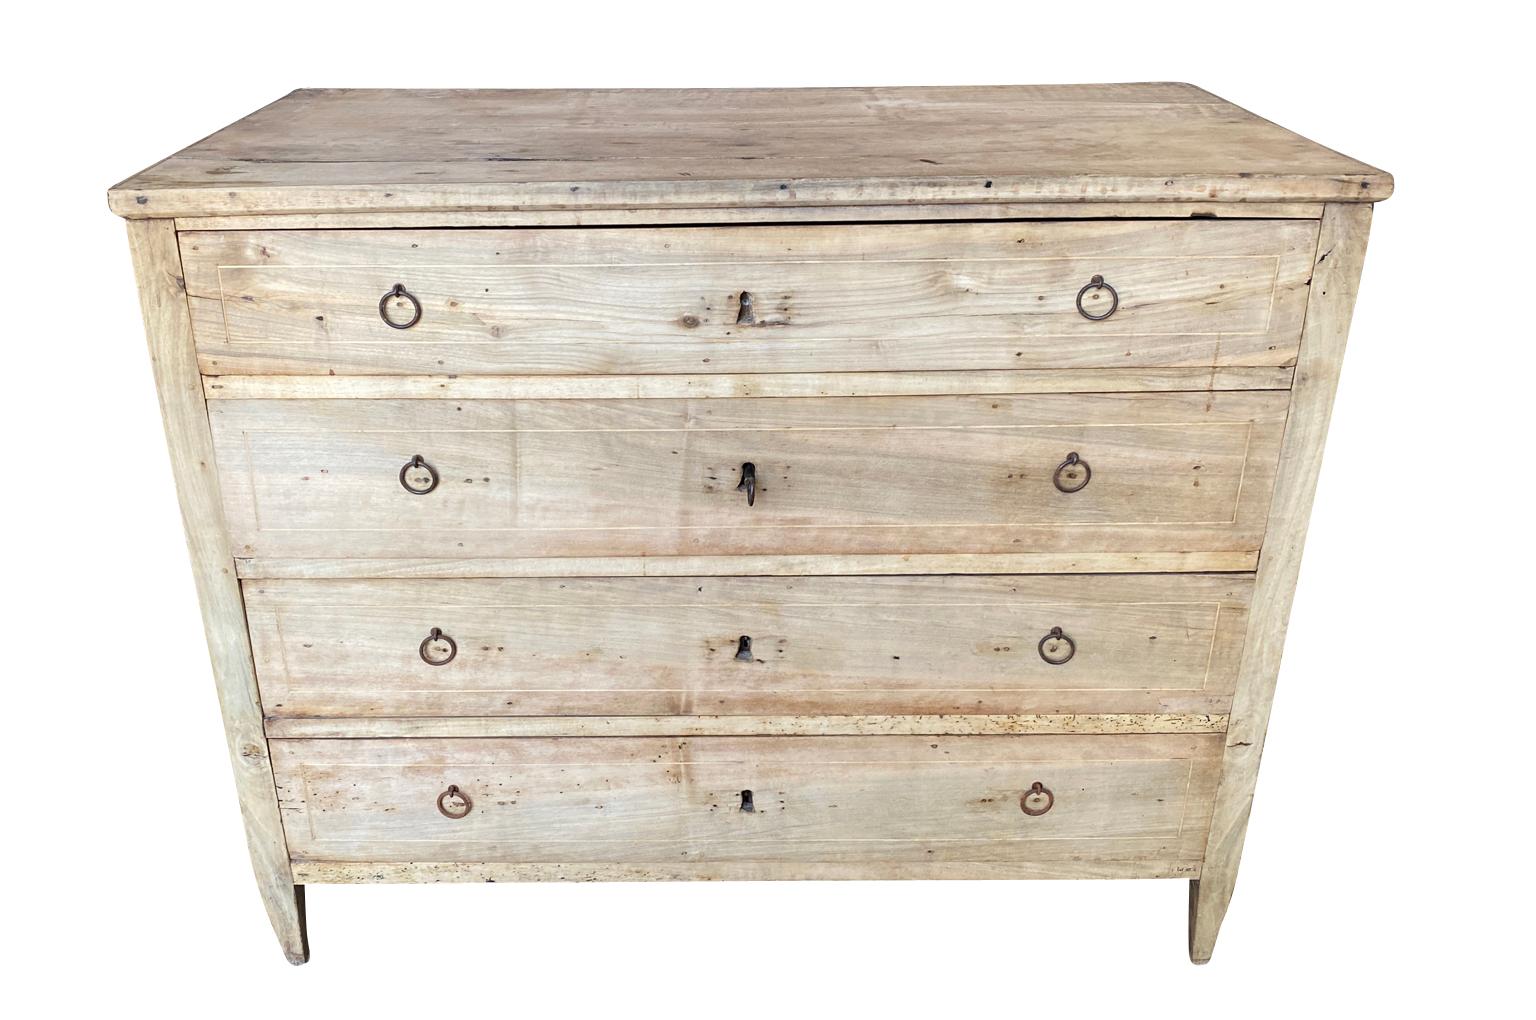 A very handsome early 19th century Directoire period commode from the Provence region of France. Soundly constructed from beautiful walnut with drawers resting on tapered legs.